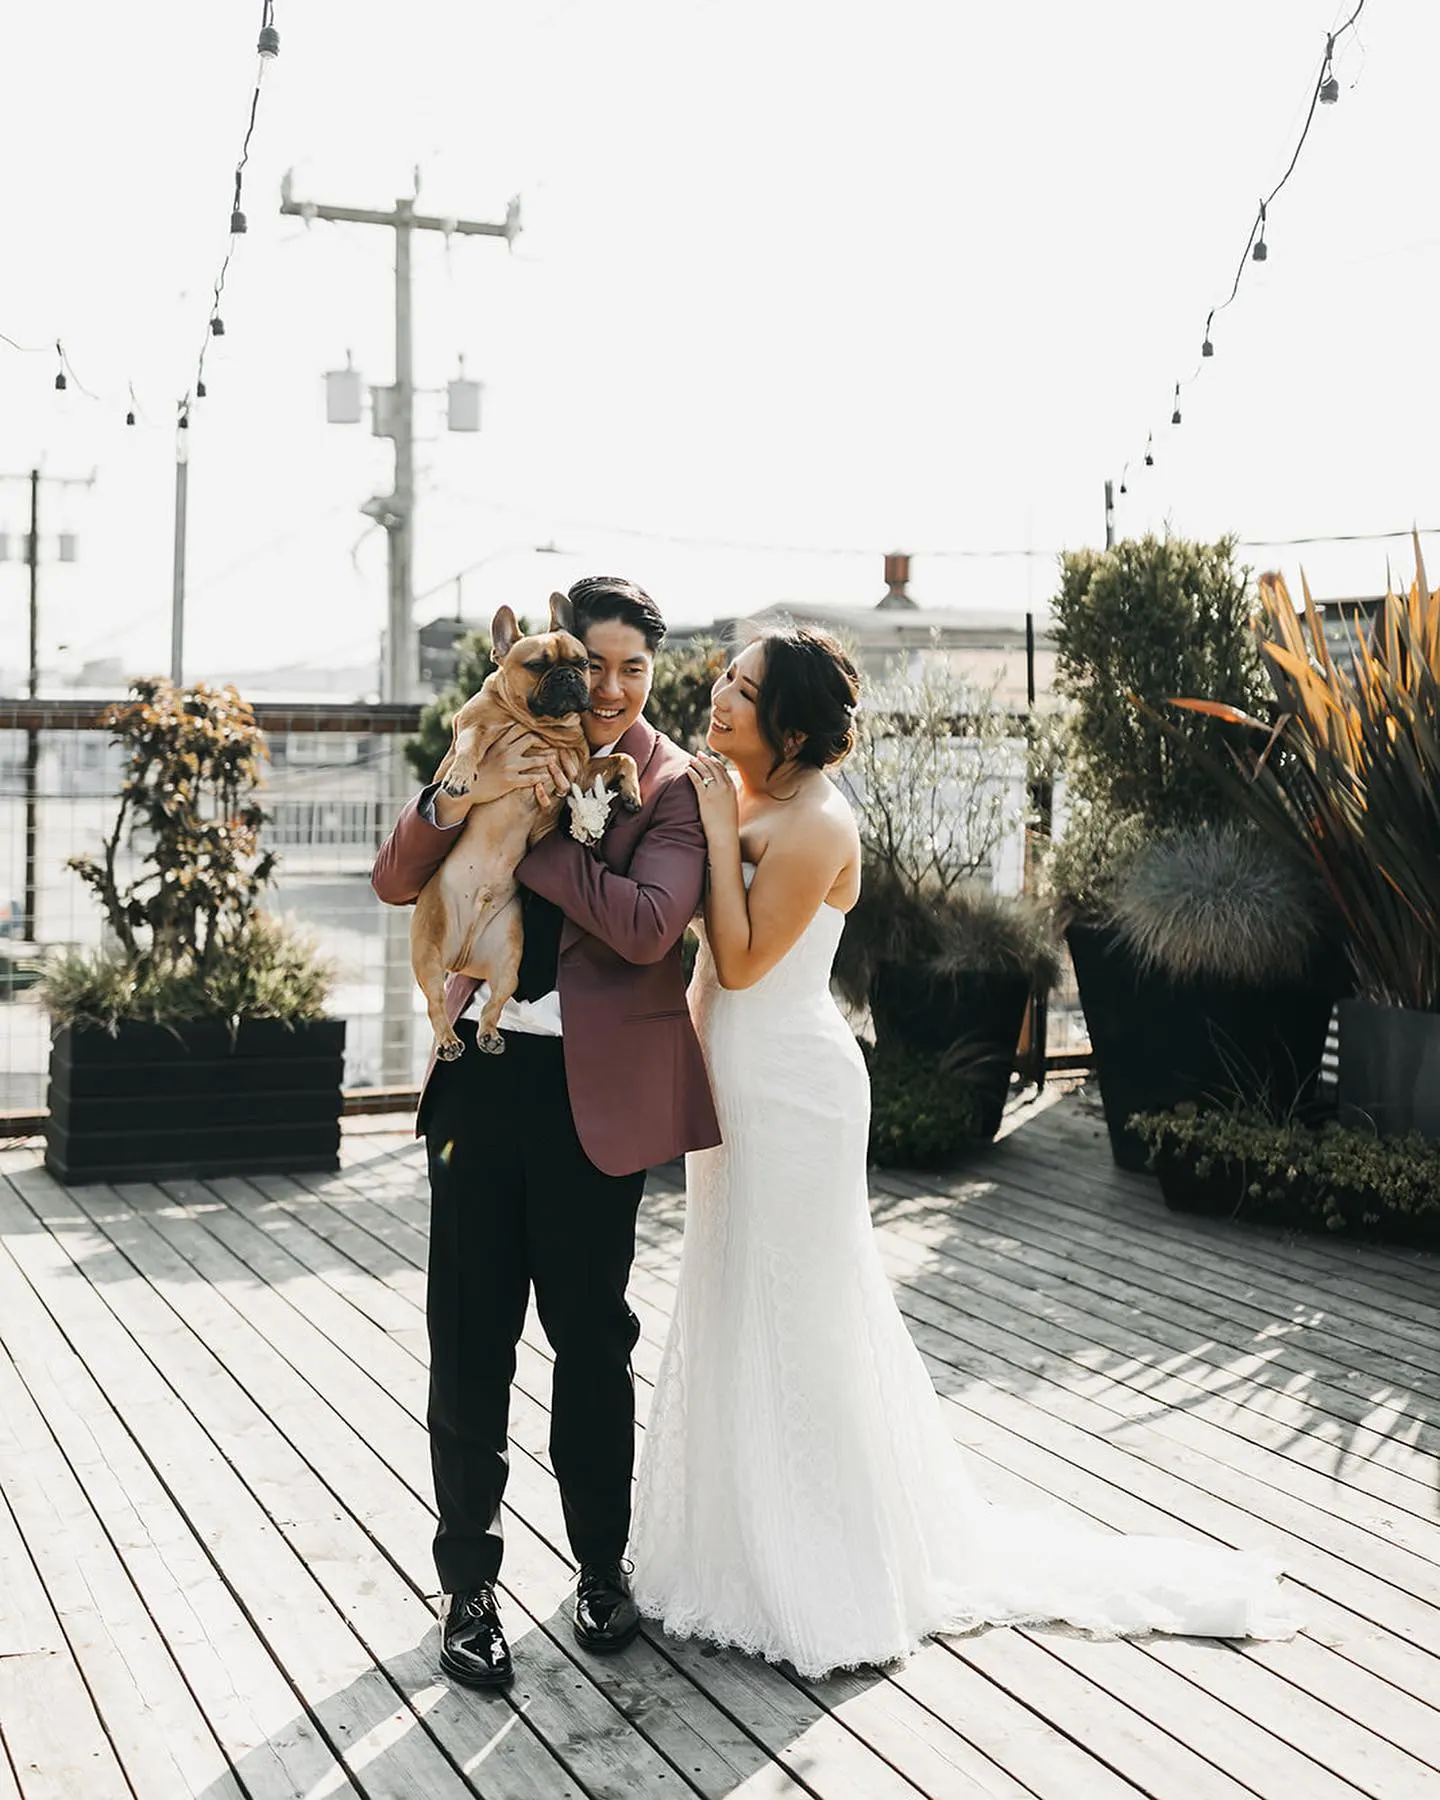 Married couple holding pet for wedding photos